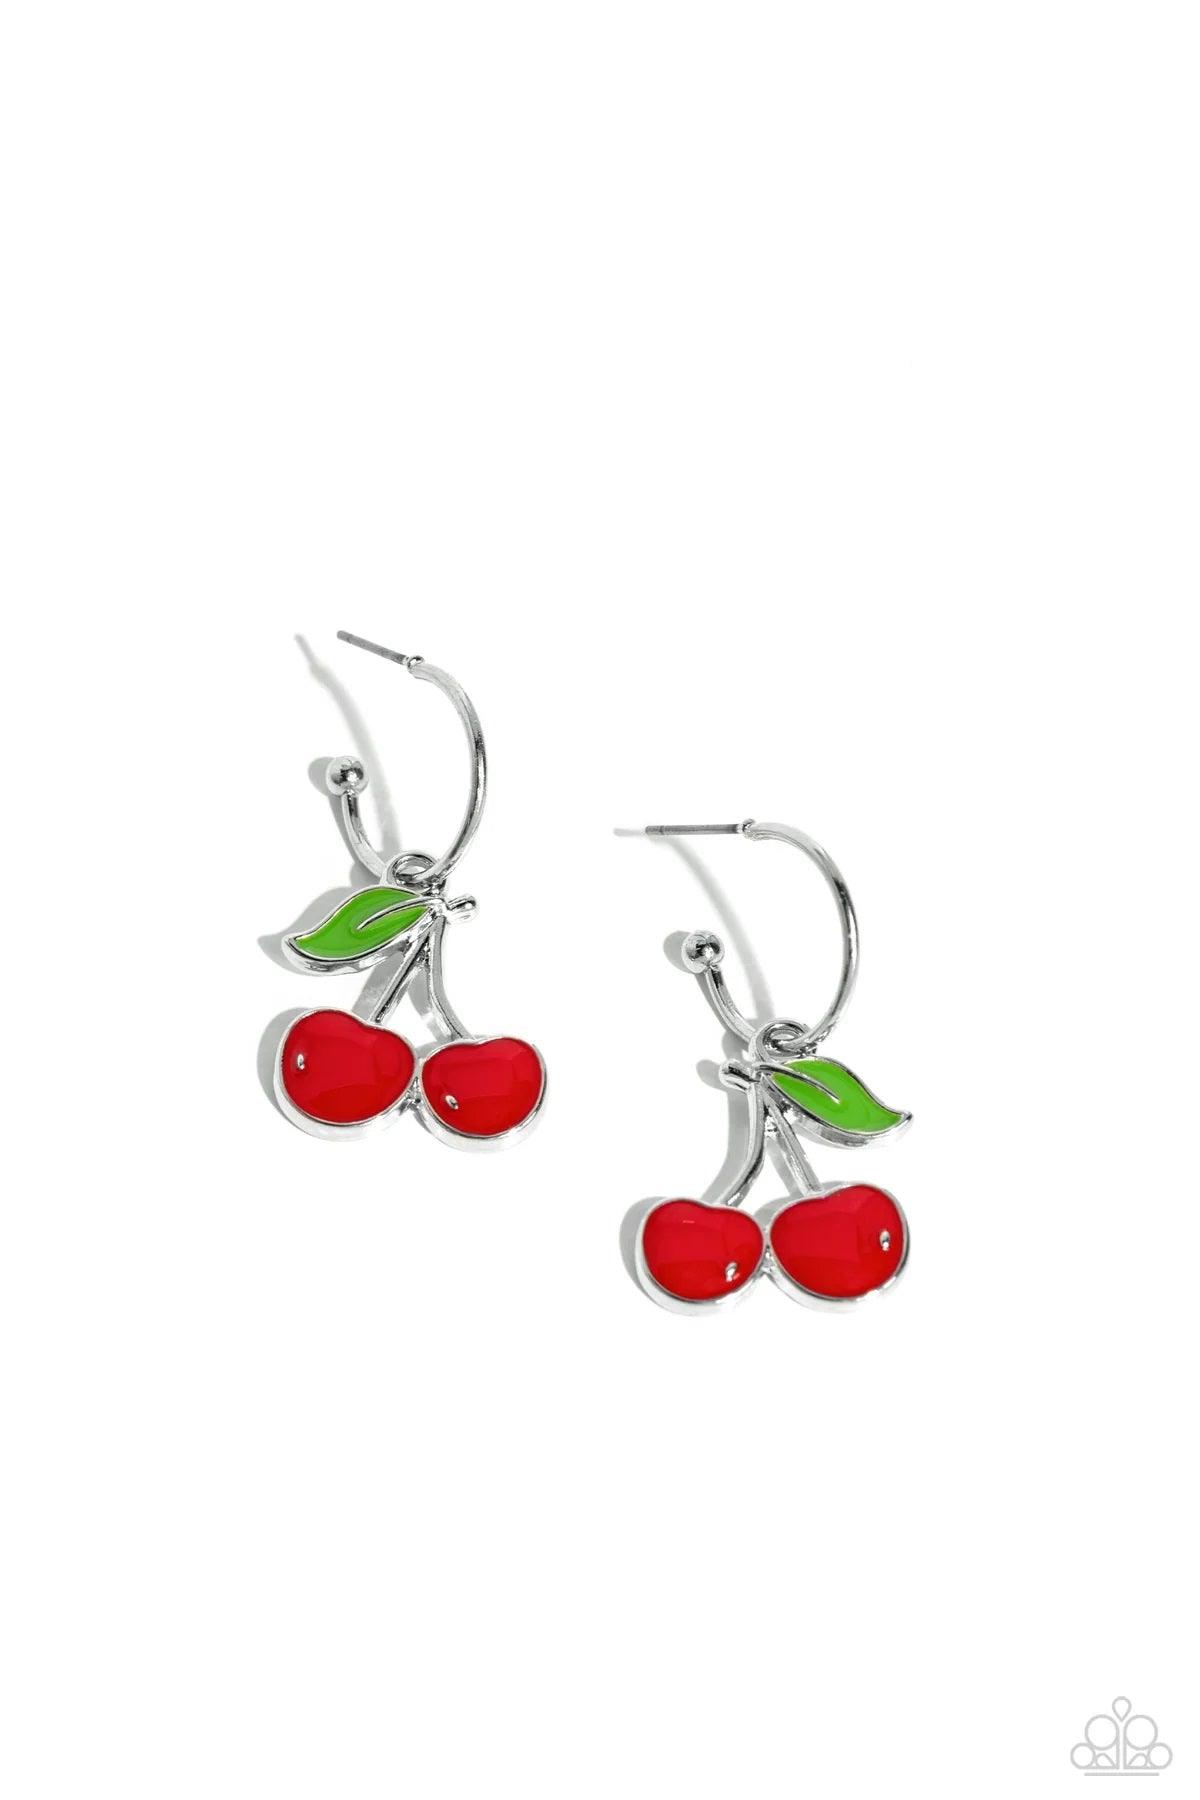 Paparazzi Accessories - Cherry Caliber - Red Earrings - Bling by JessieK